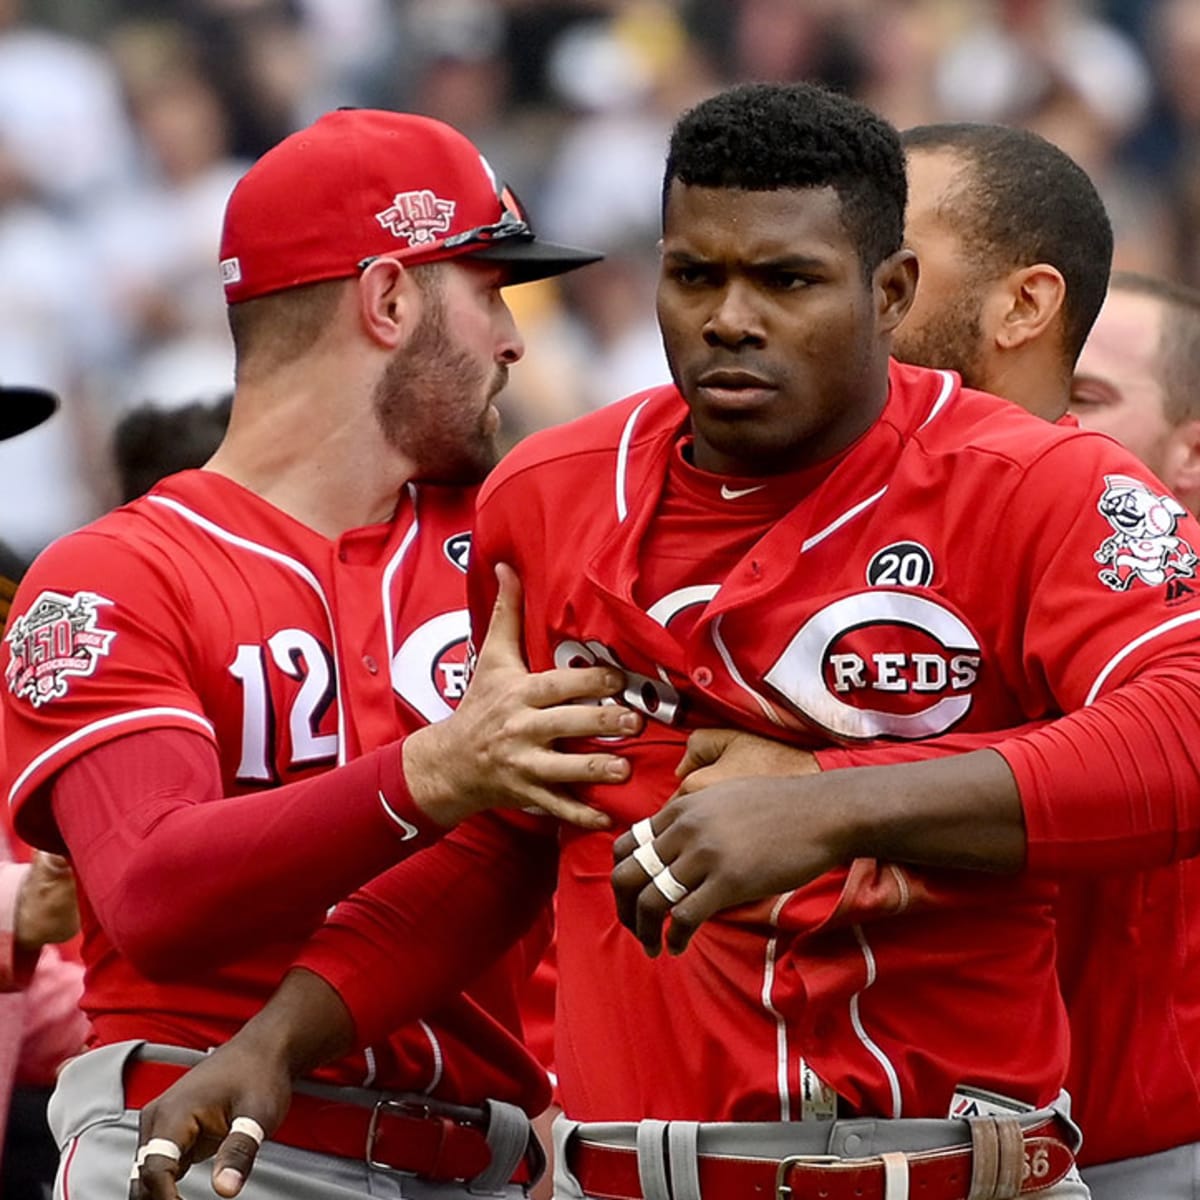 Yasiel Puig reflects on bench-clearing brawl, trade reports